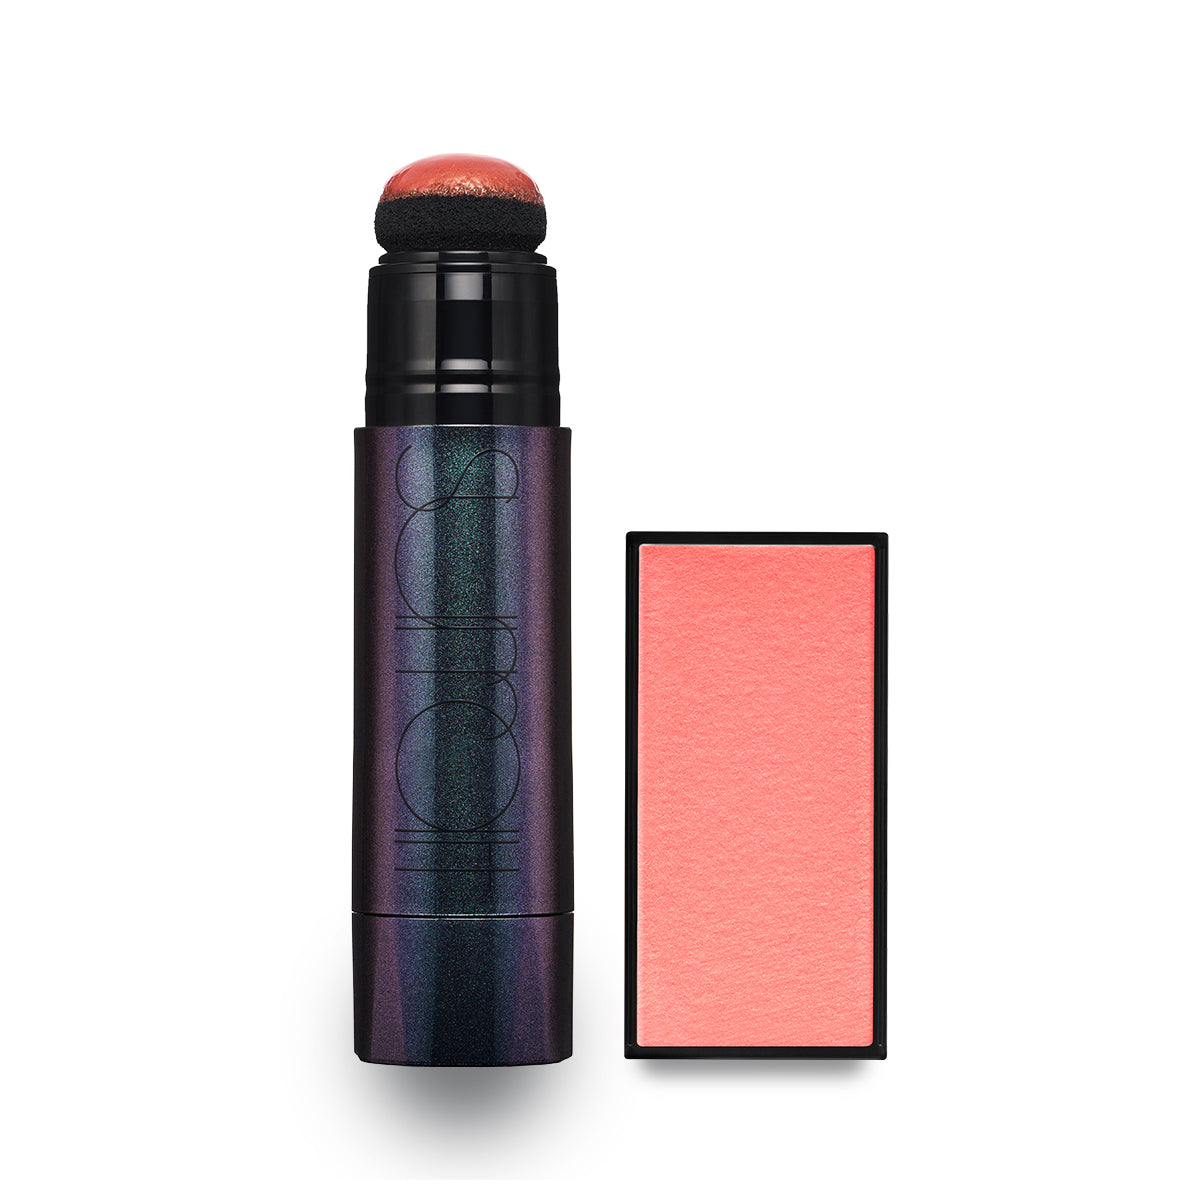 PARFAIT - PINKY CORAL - Coordinating powder and liquid blush pair in pinky coral shade